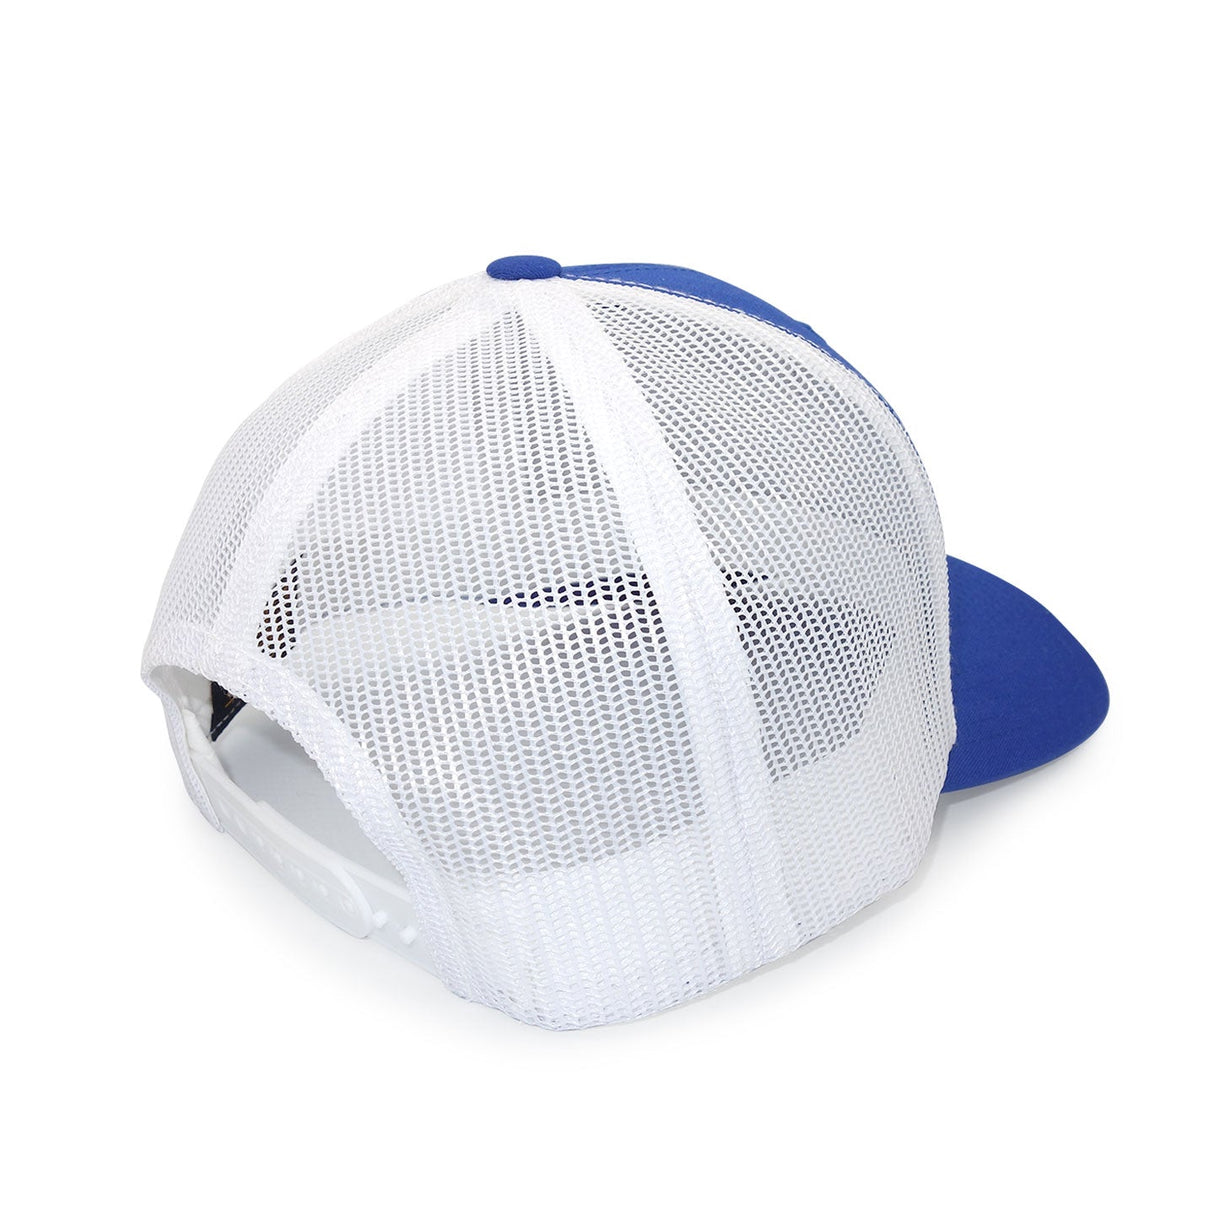 Survey Says Royal Blue and White Five Panel Trucker Cap